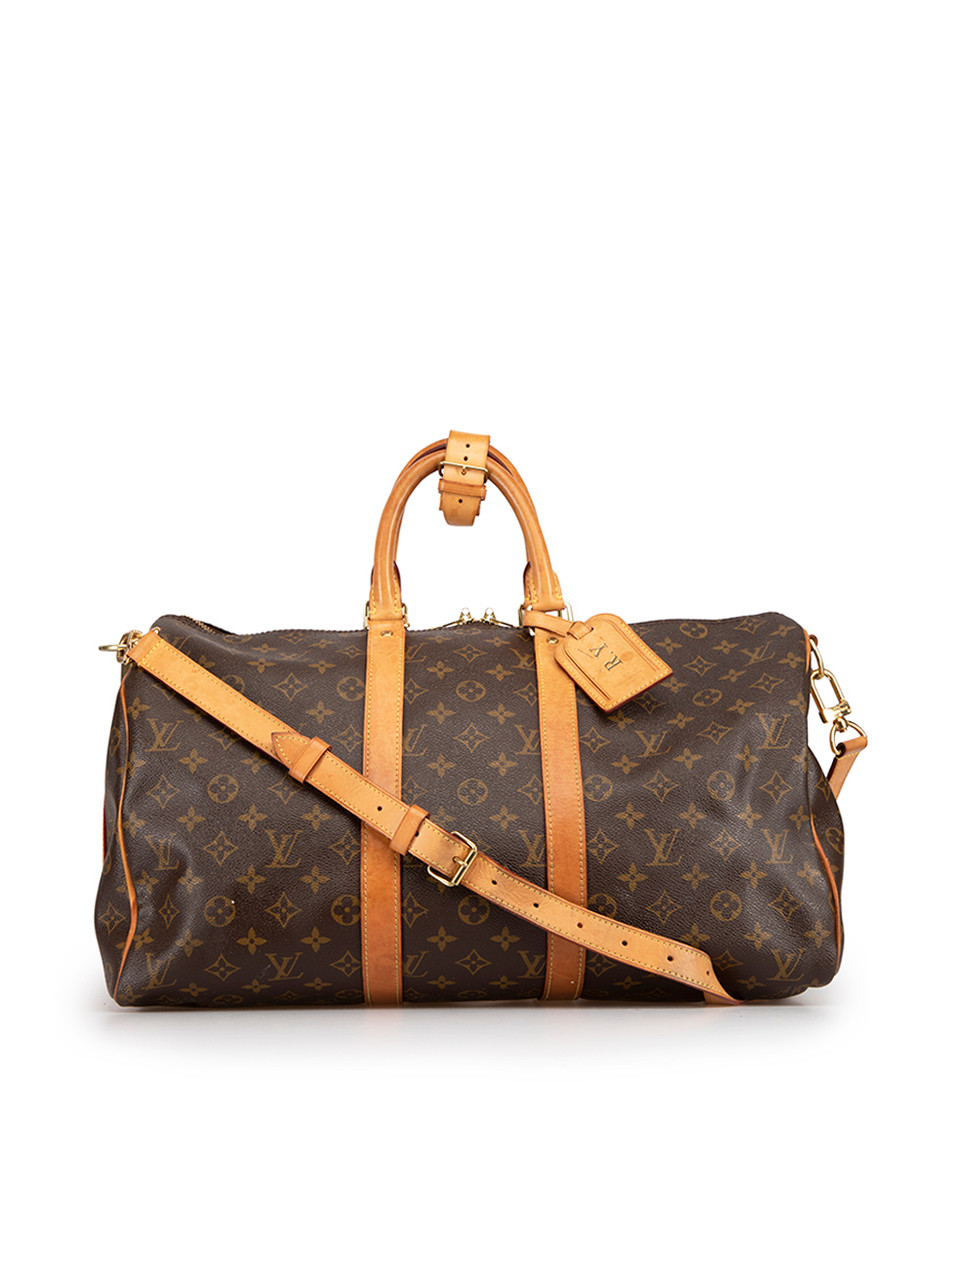 Used Louis Vuitton Brown Leather Keepall 45 Travel Bag